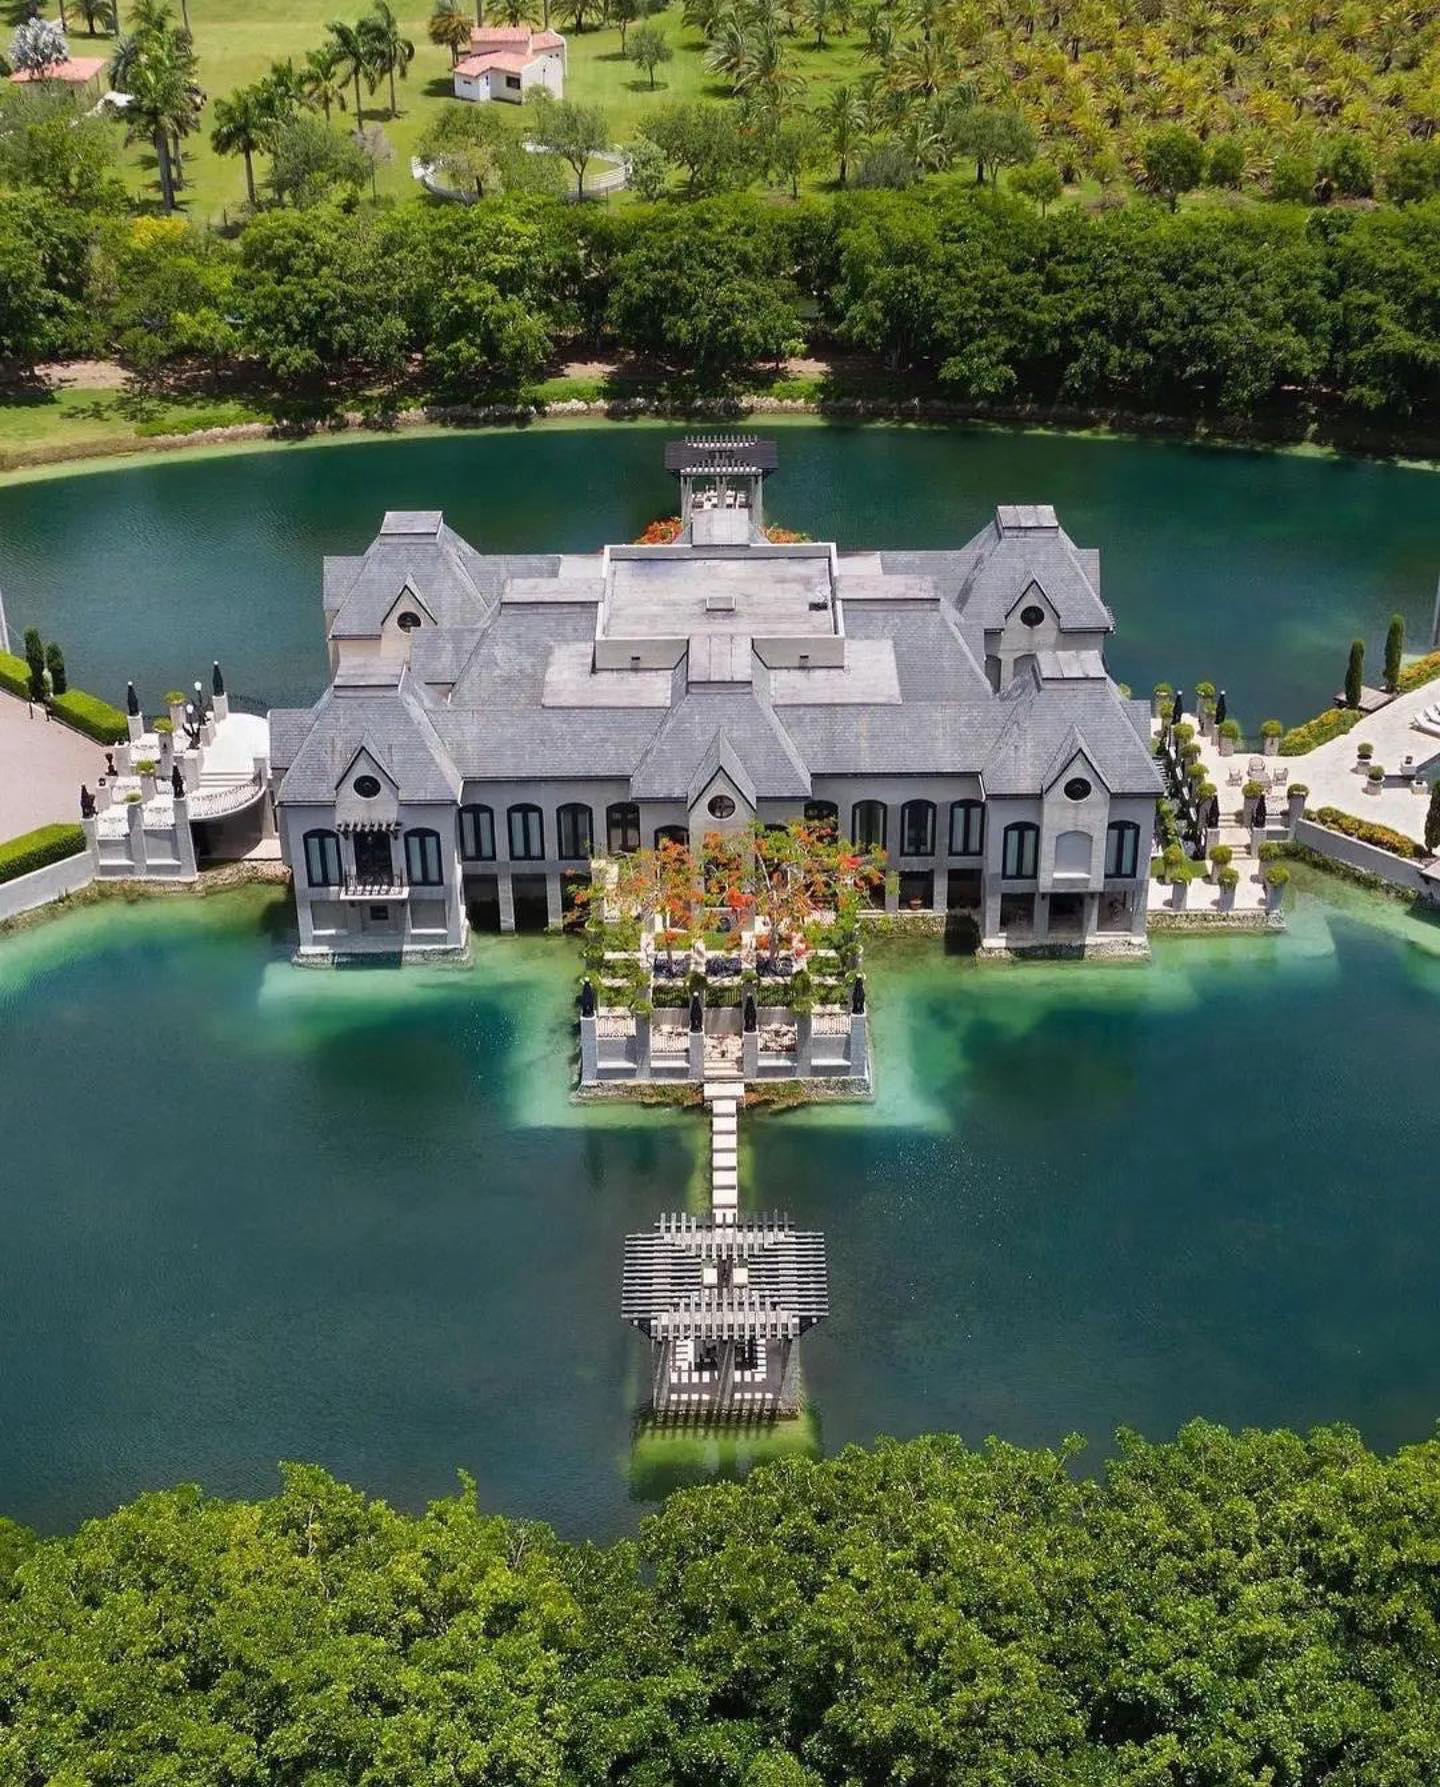 Luxurious Mordern Houses - ・・・This unique island estate is situated in Miami, Florida and is listed